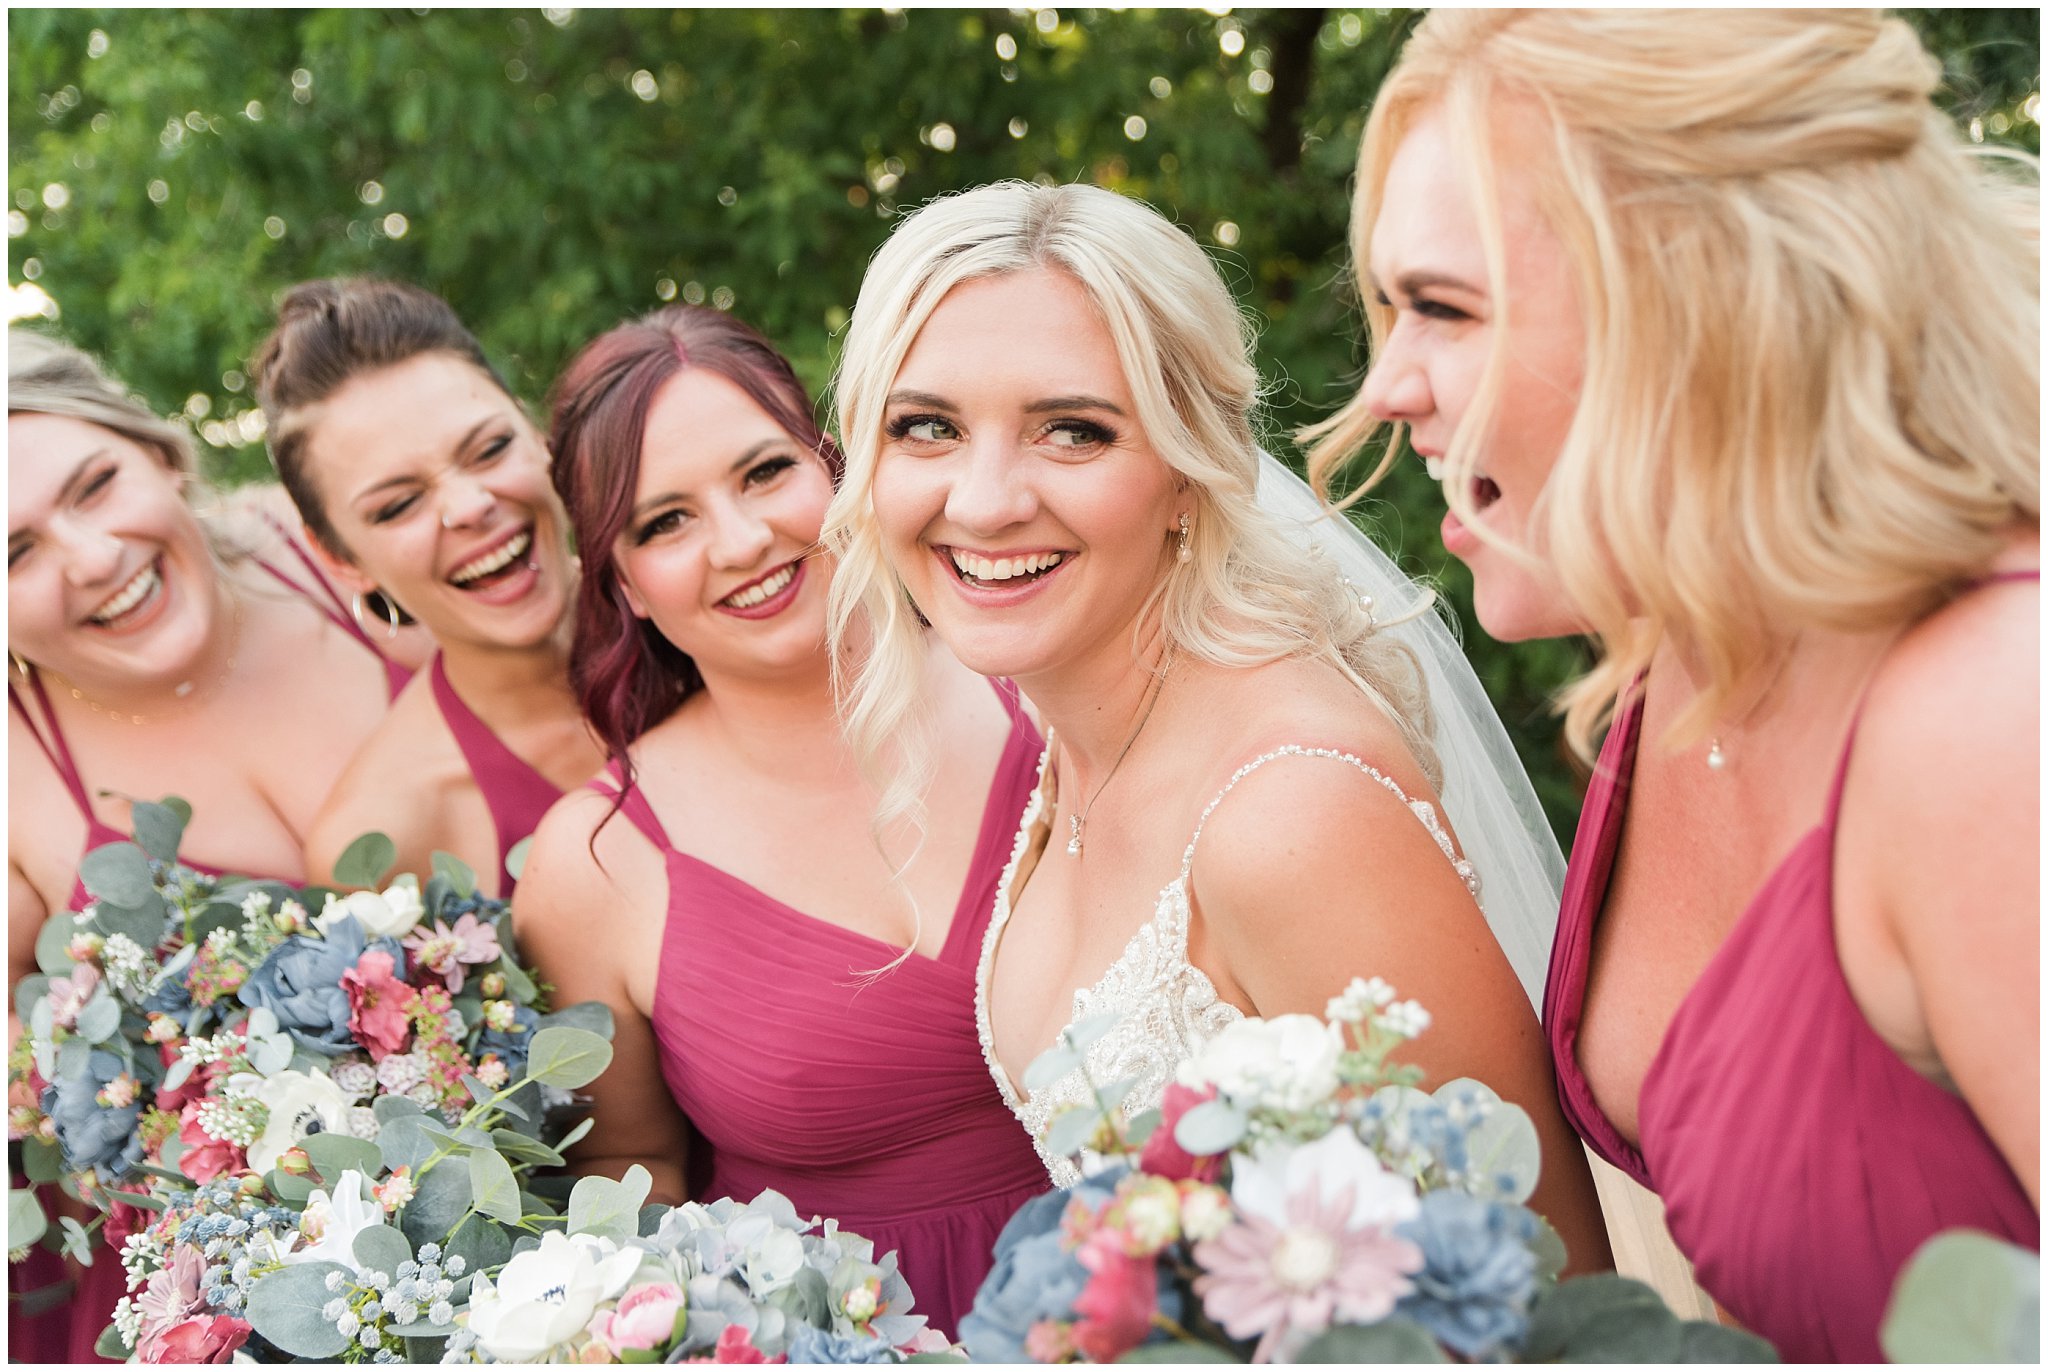 Bride and bridesmaids with maroon dresses | Dusty Blue and Rose Summer Wedding at Oak Hills Utah | Jessie and Dallin Photography